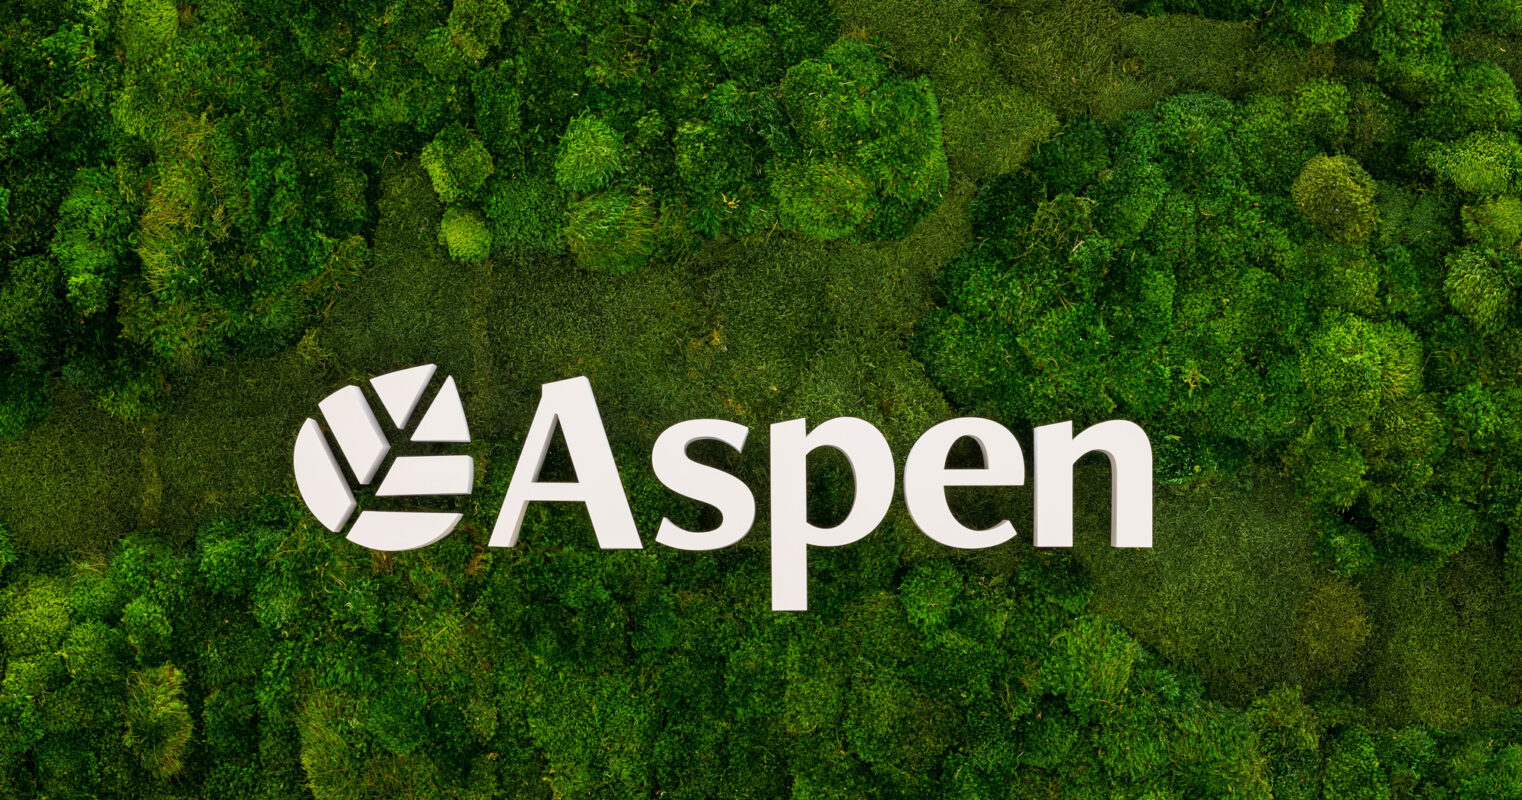 Lush greenery envelopes the Aspen logo, symbolizing eco-friendly design with a seamless blend of nature and branding, ideal for biophilic interior concepts.